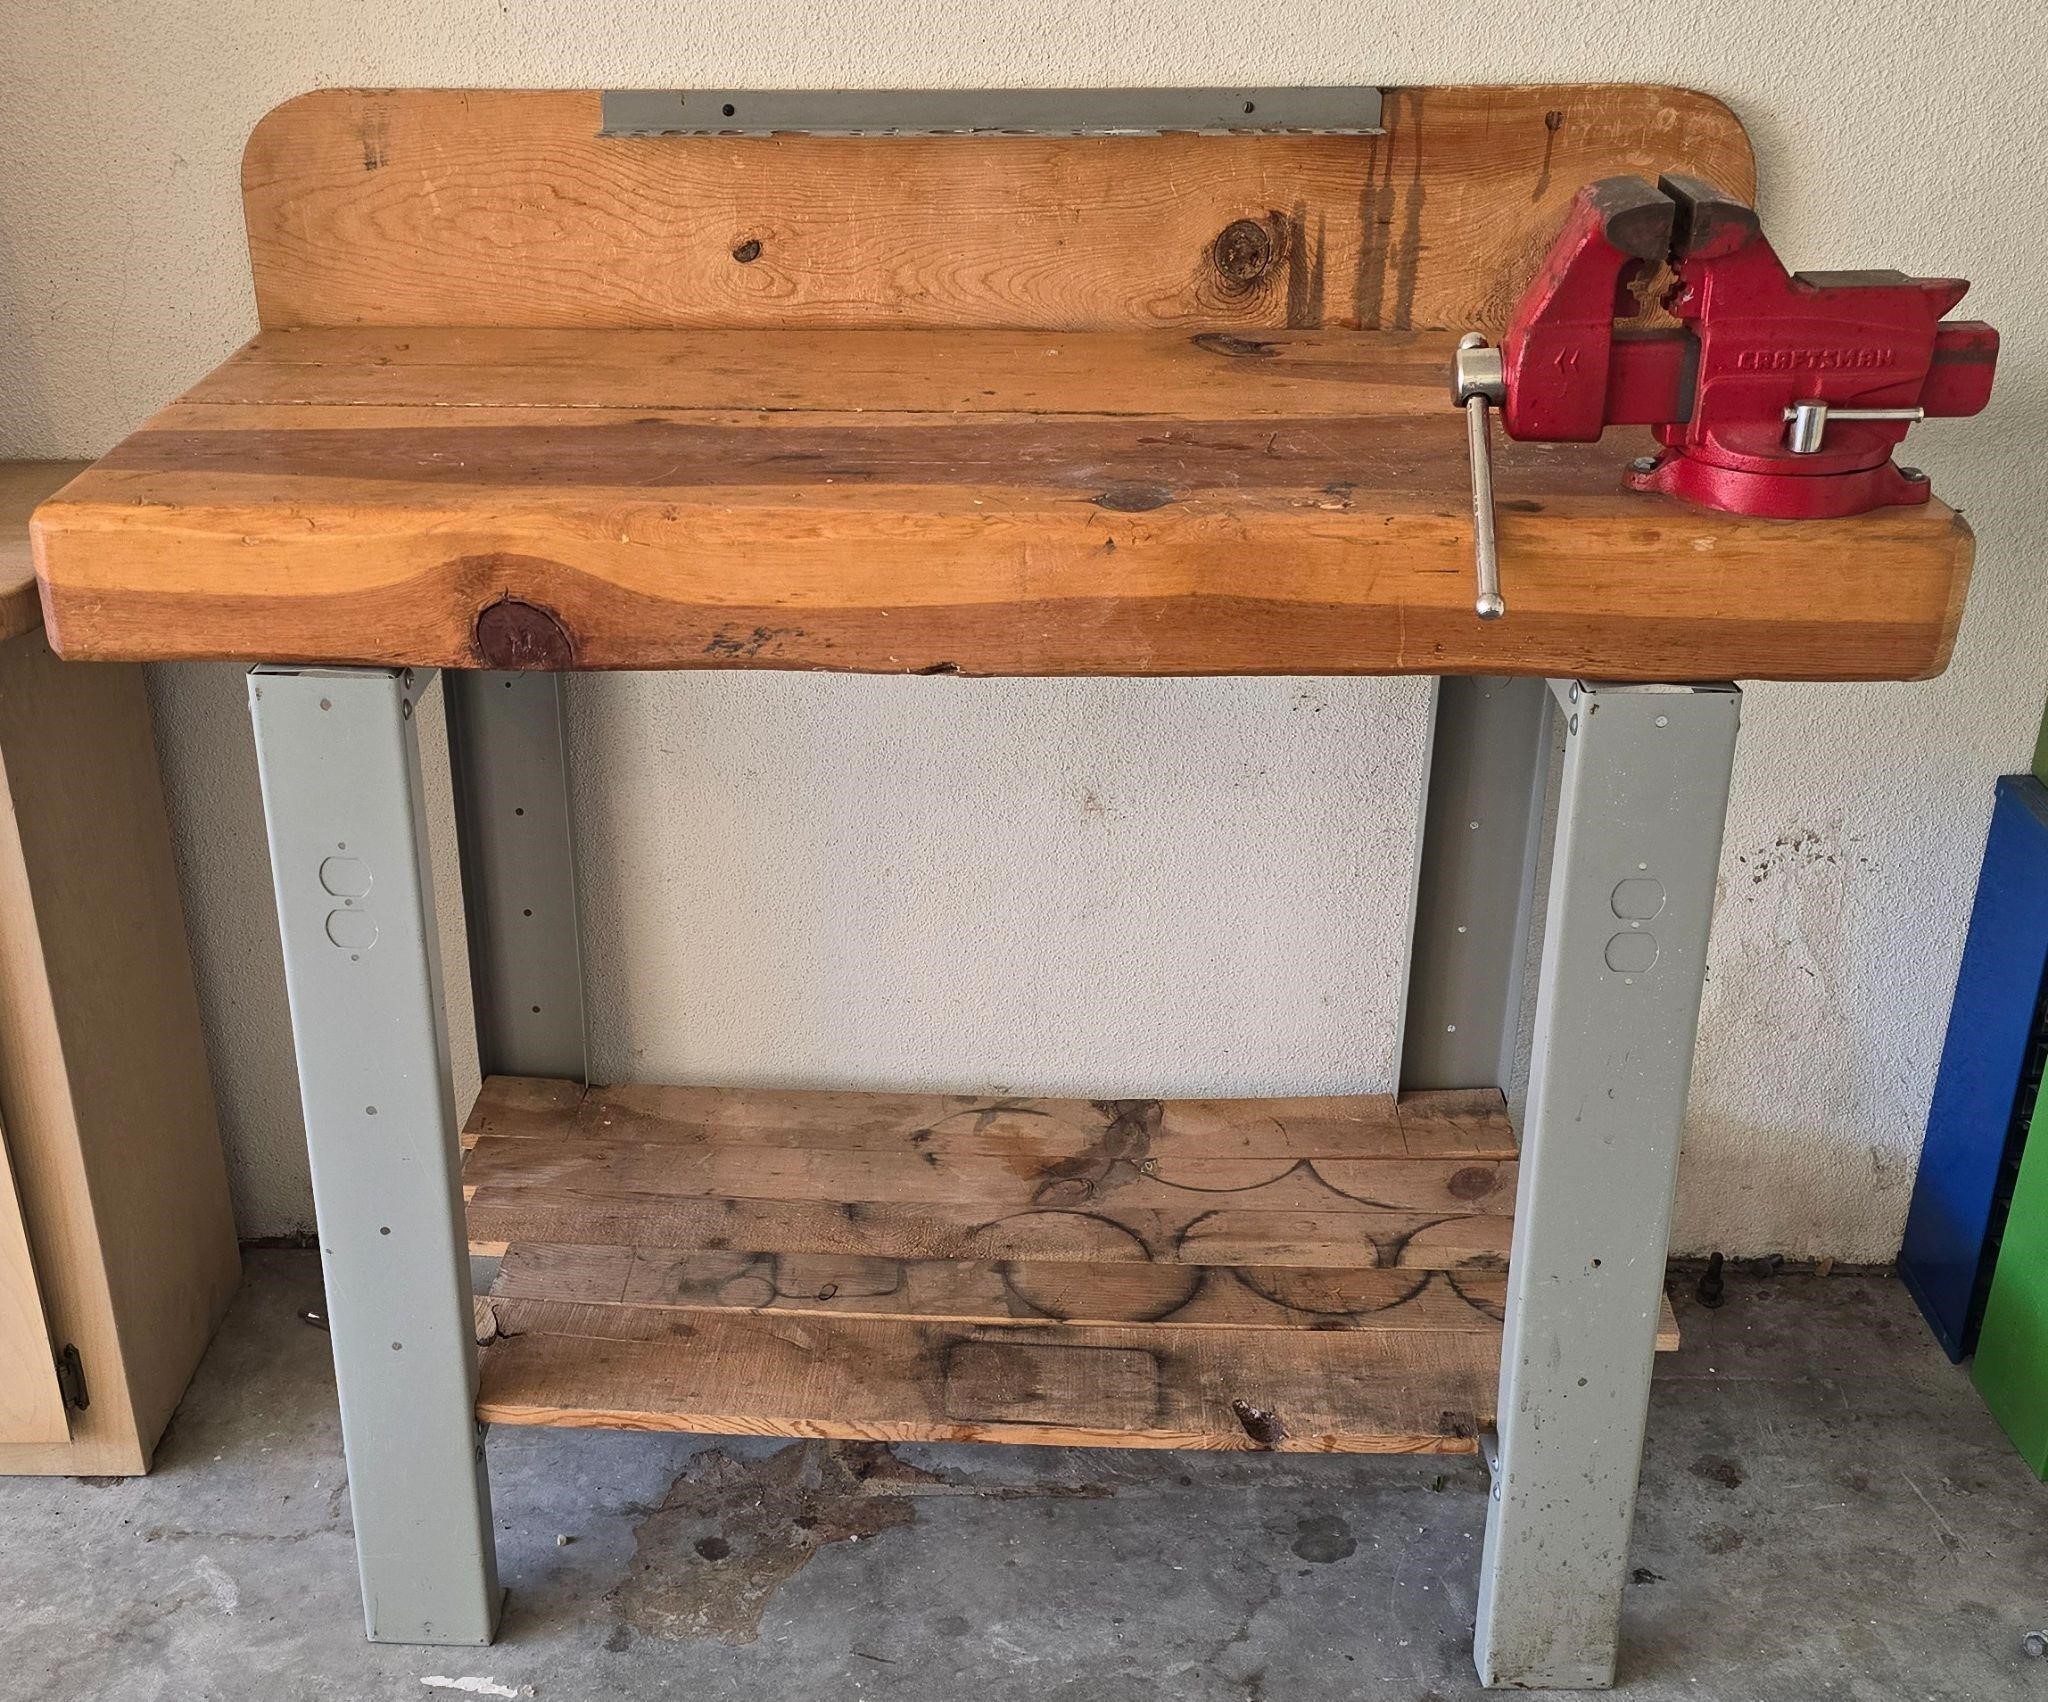 Wooden work bench with vise